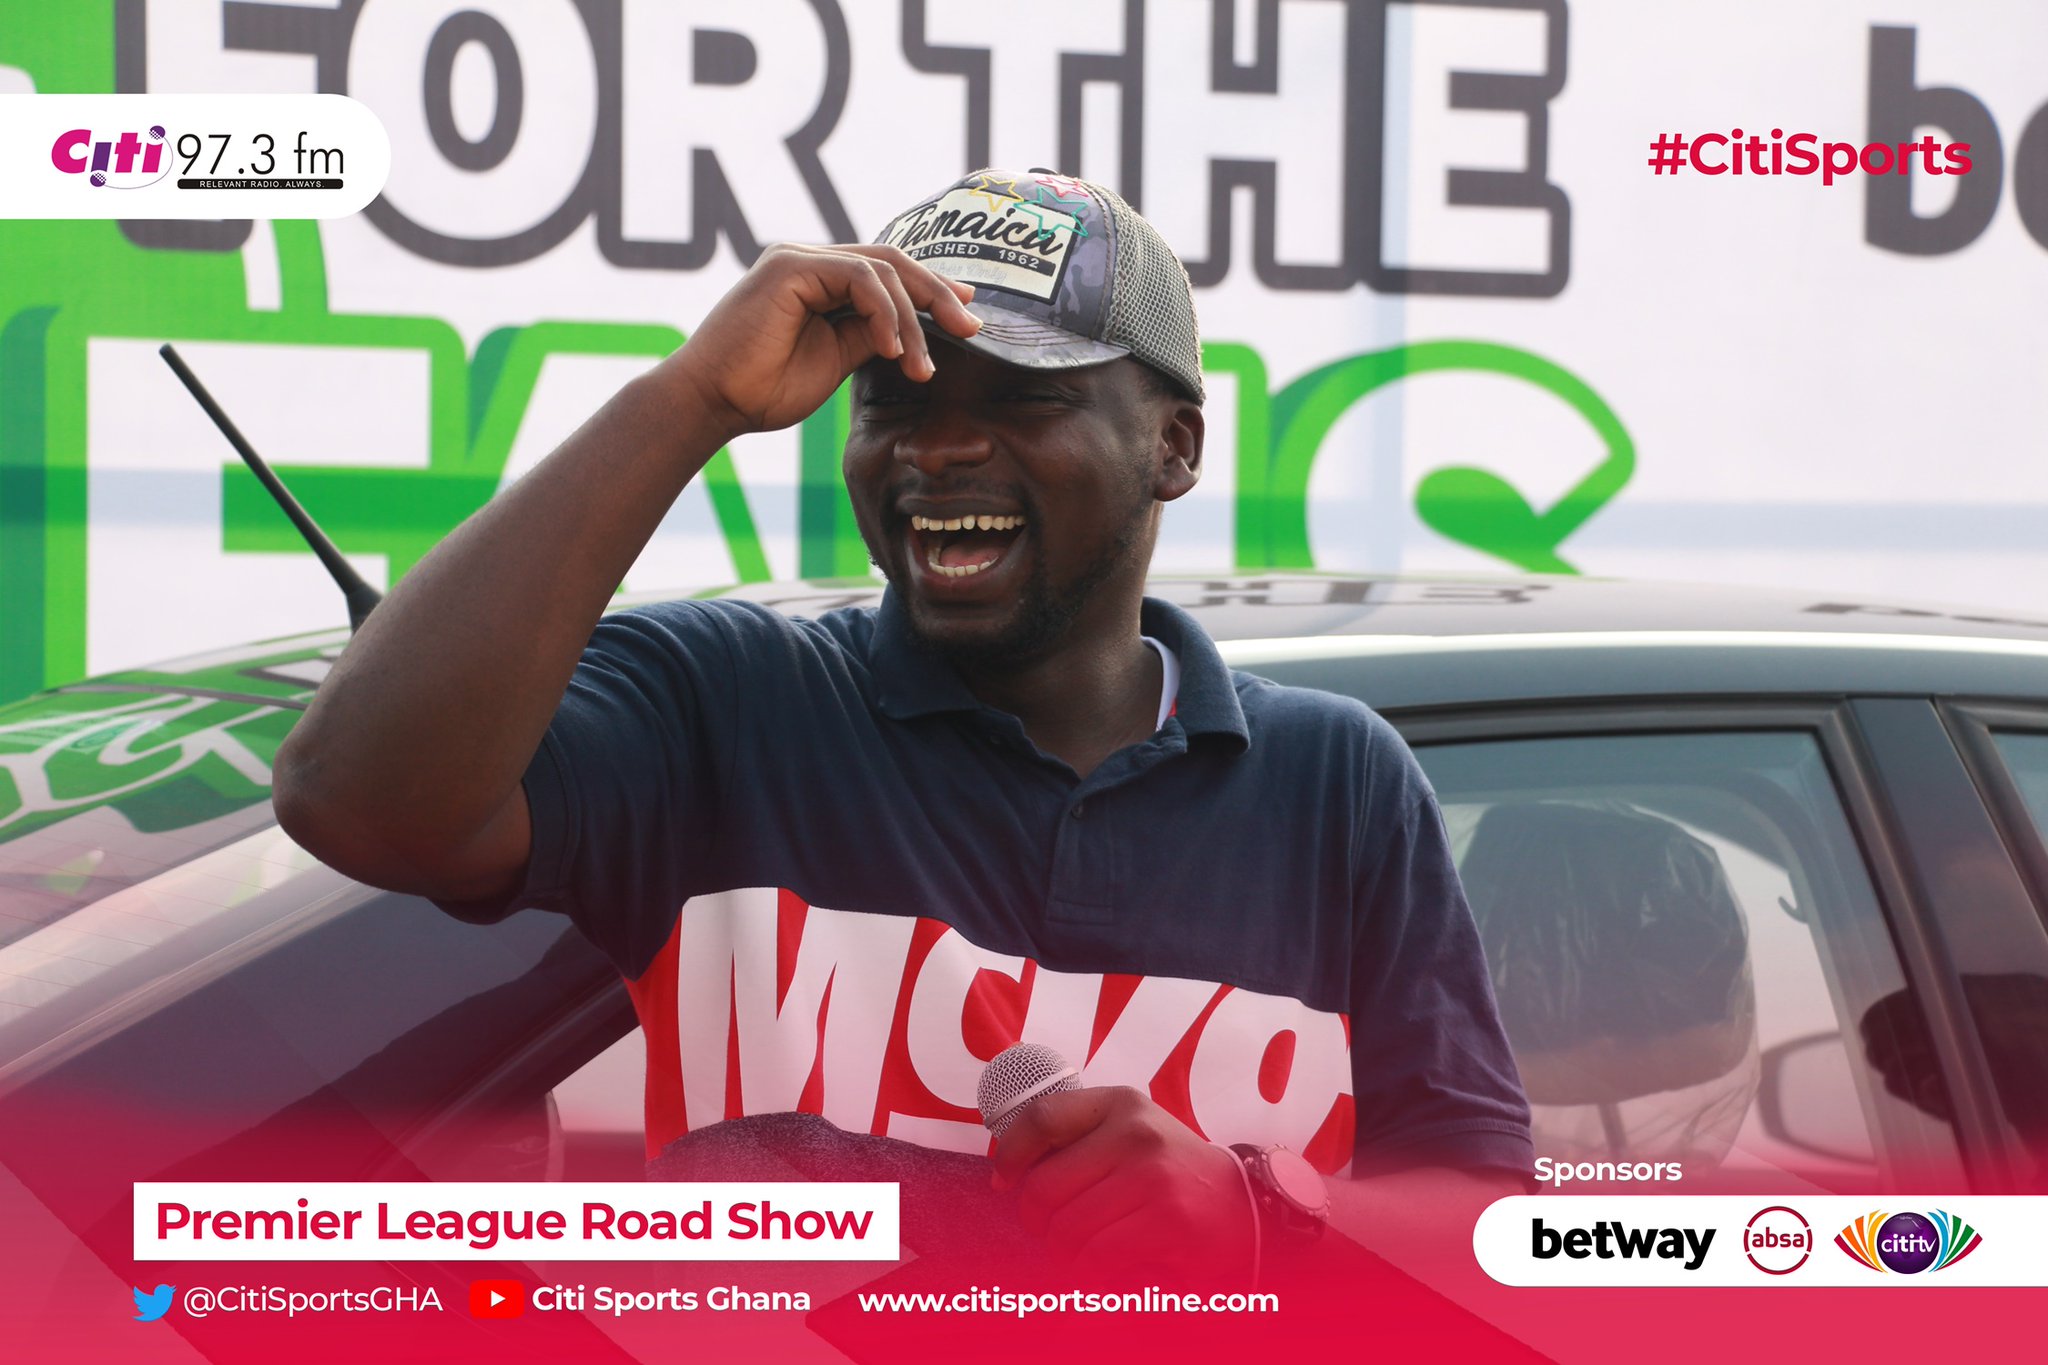 Betway presents brand new VW Sedan to winner of ‘For the Fans’ promo